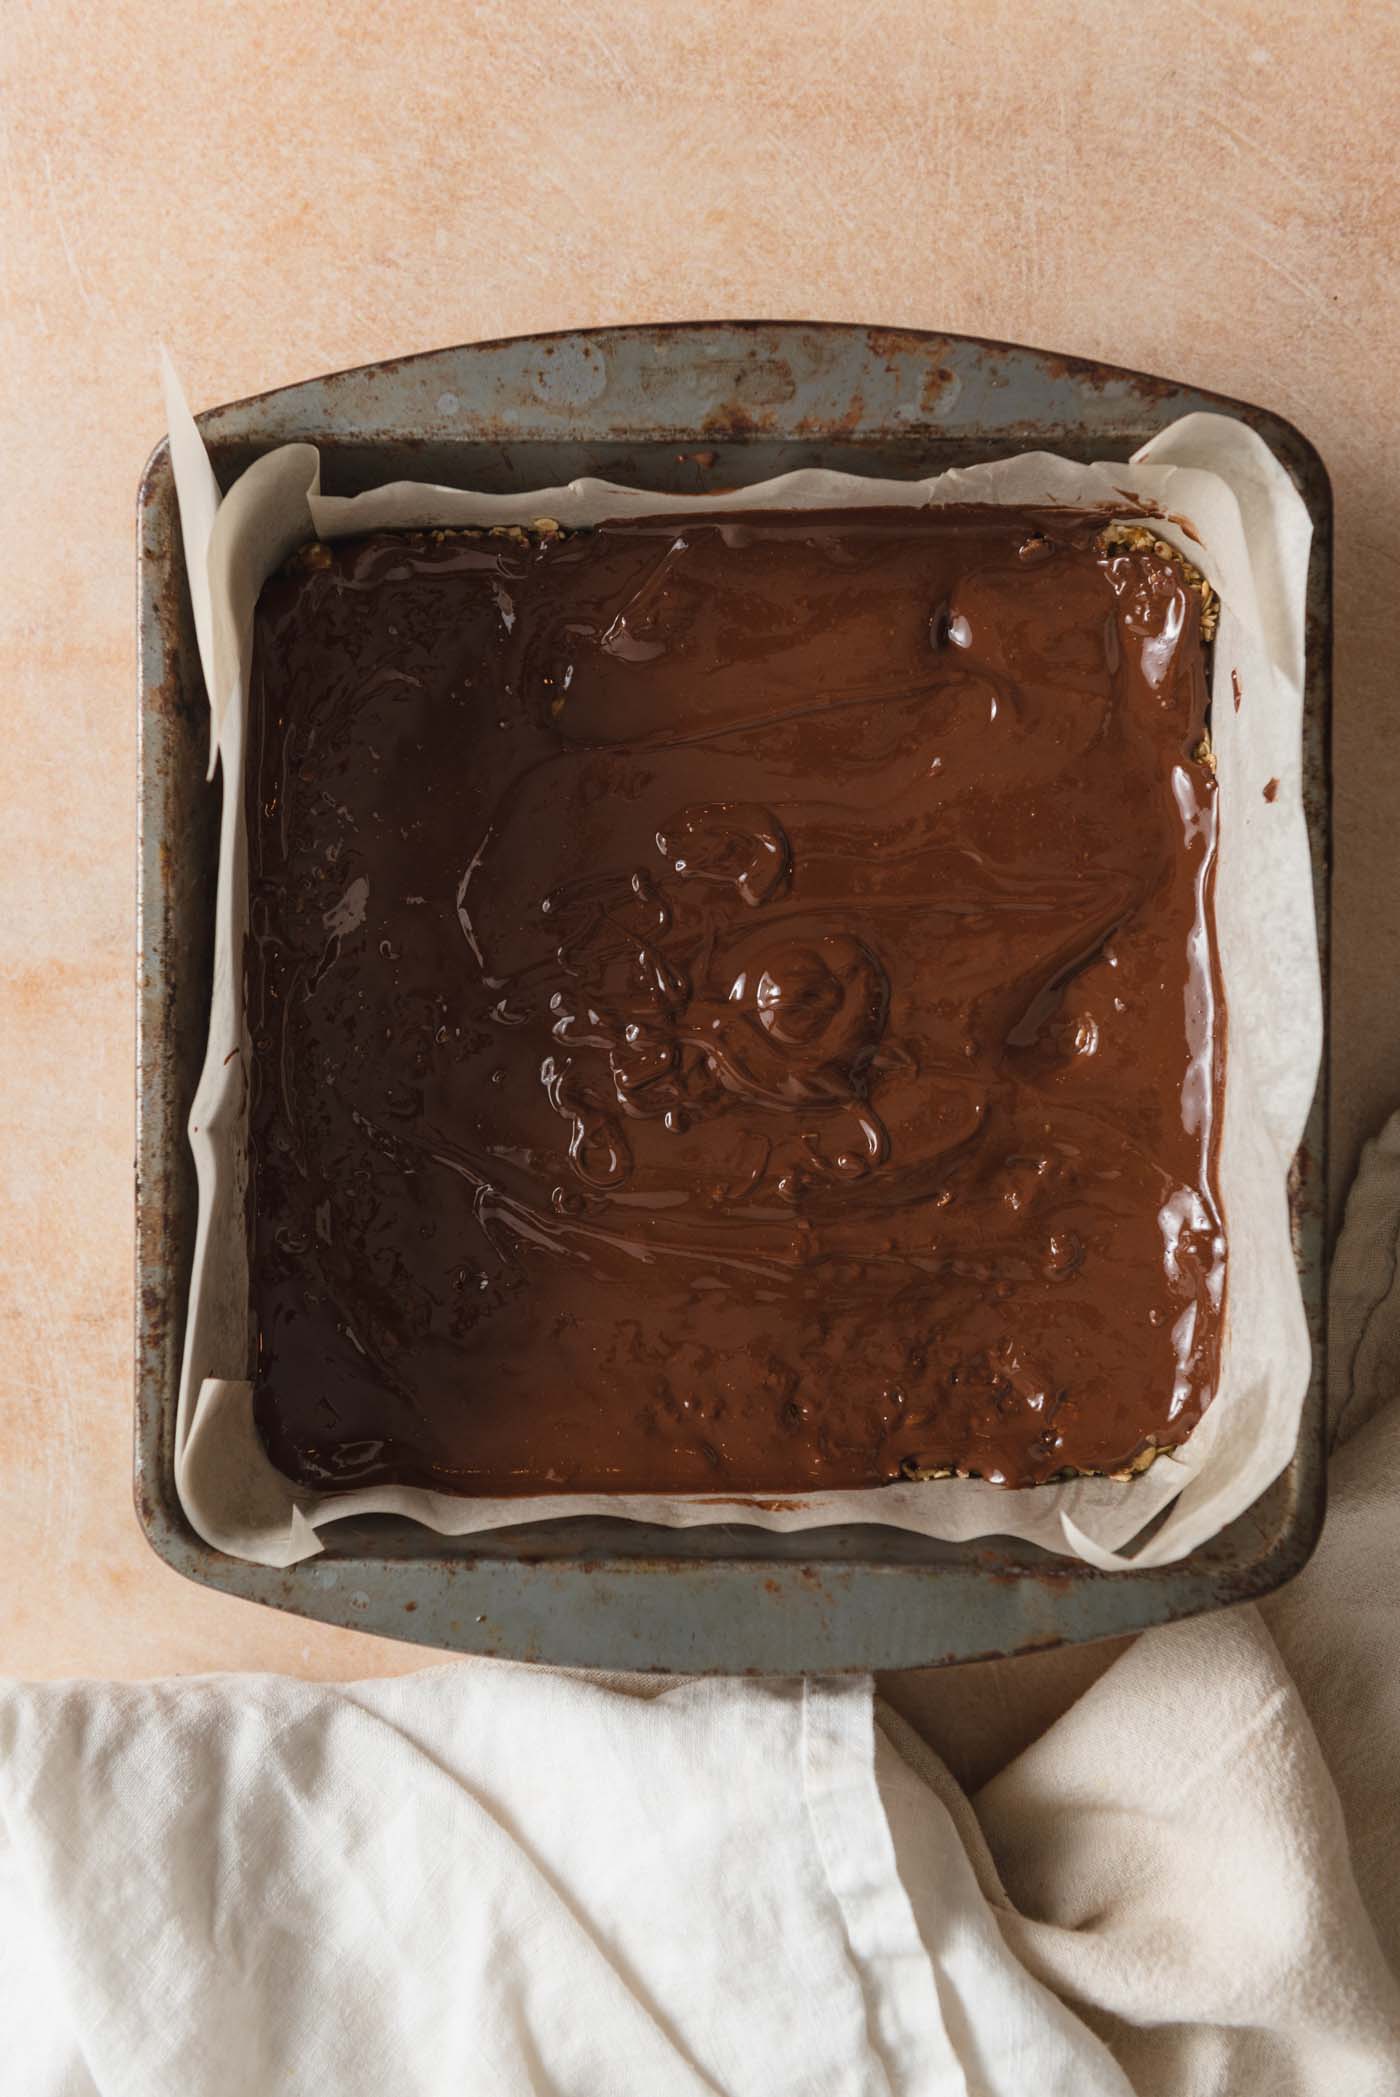 A layer of melted chocolate in a square baking pan lined with parchment paper.